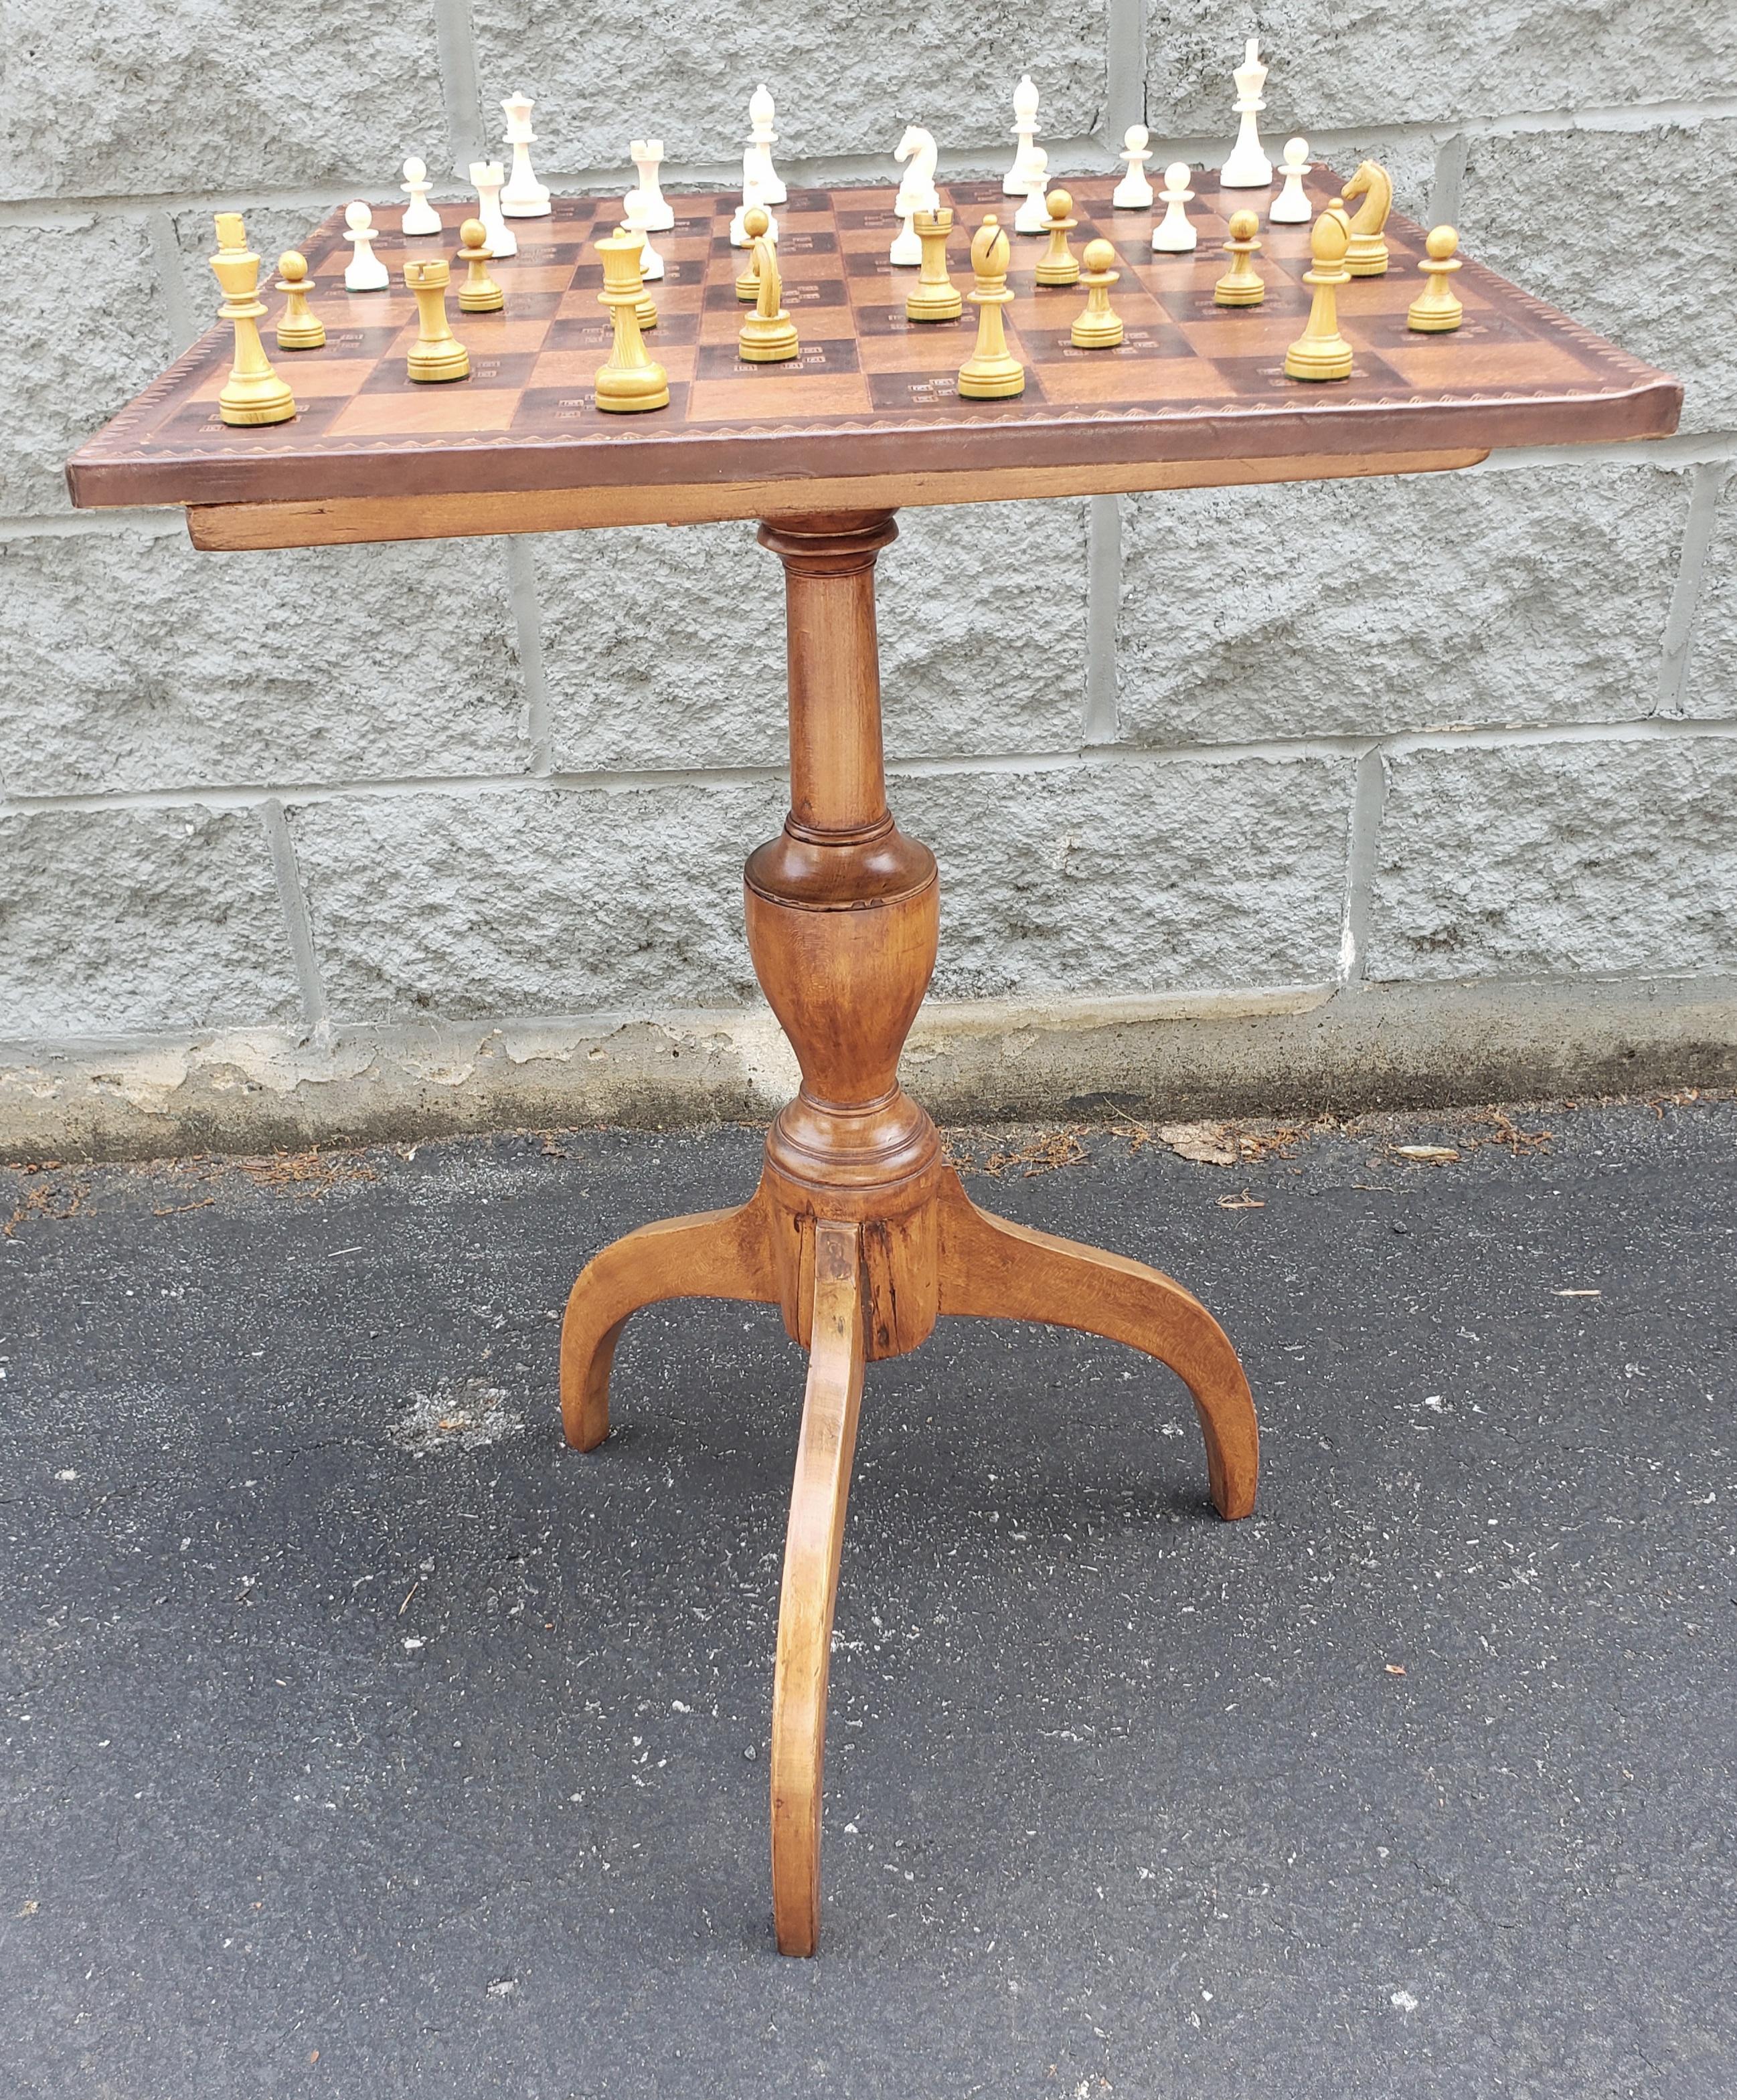 19th Century Spider Legs Maple Table & Leather Top Chess Board and Pieces Set For Sale 4